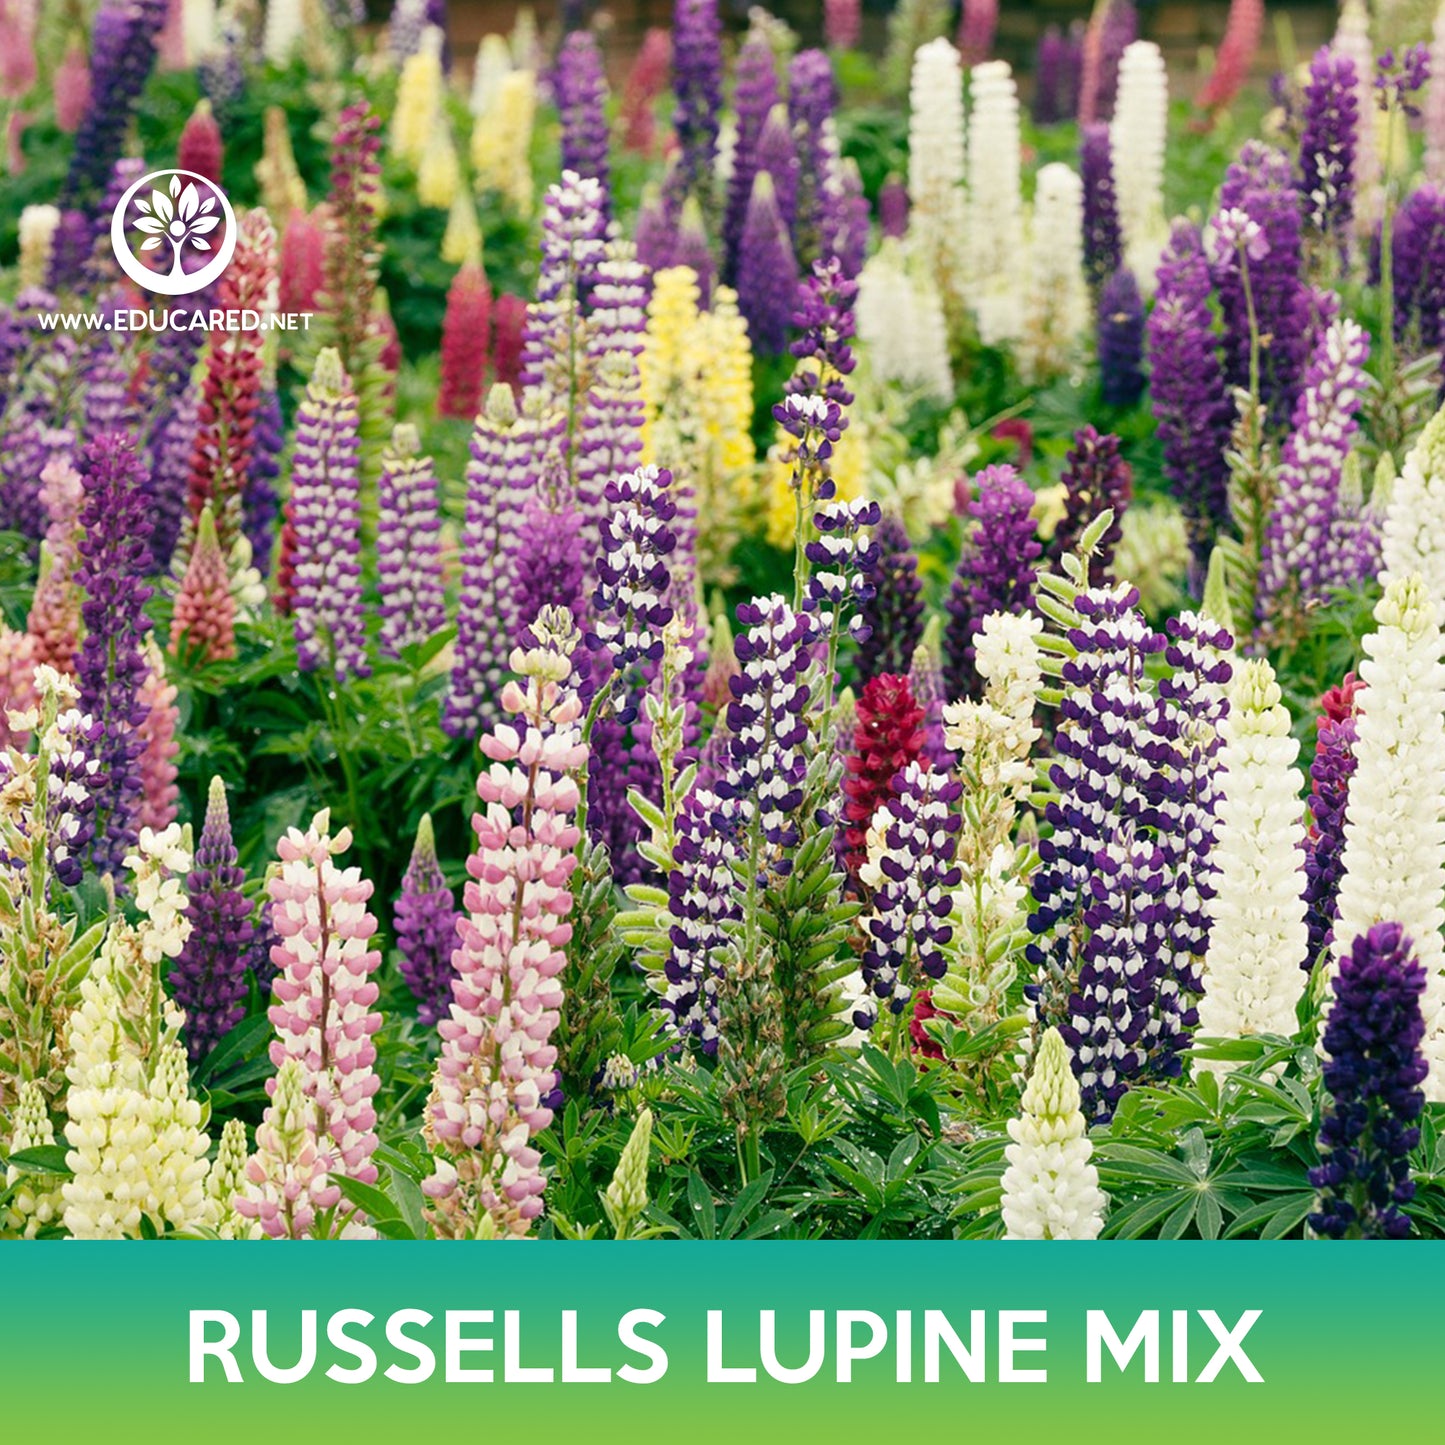 Russells Lupine Mix Seeds, Lupinus Polyphyllus Russell